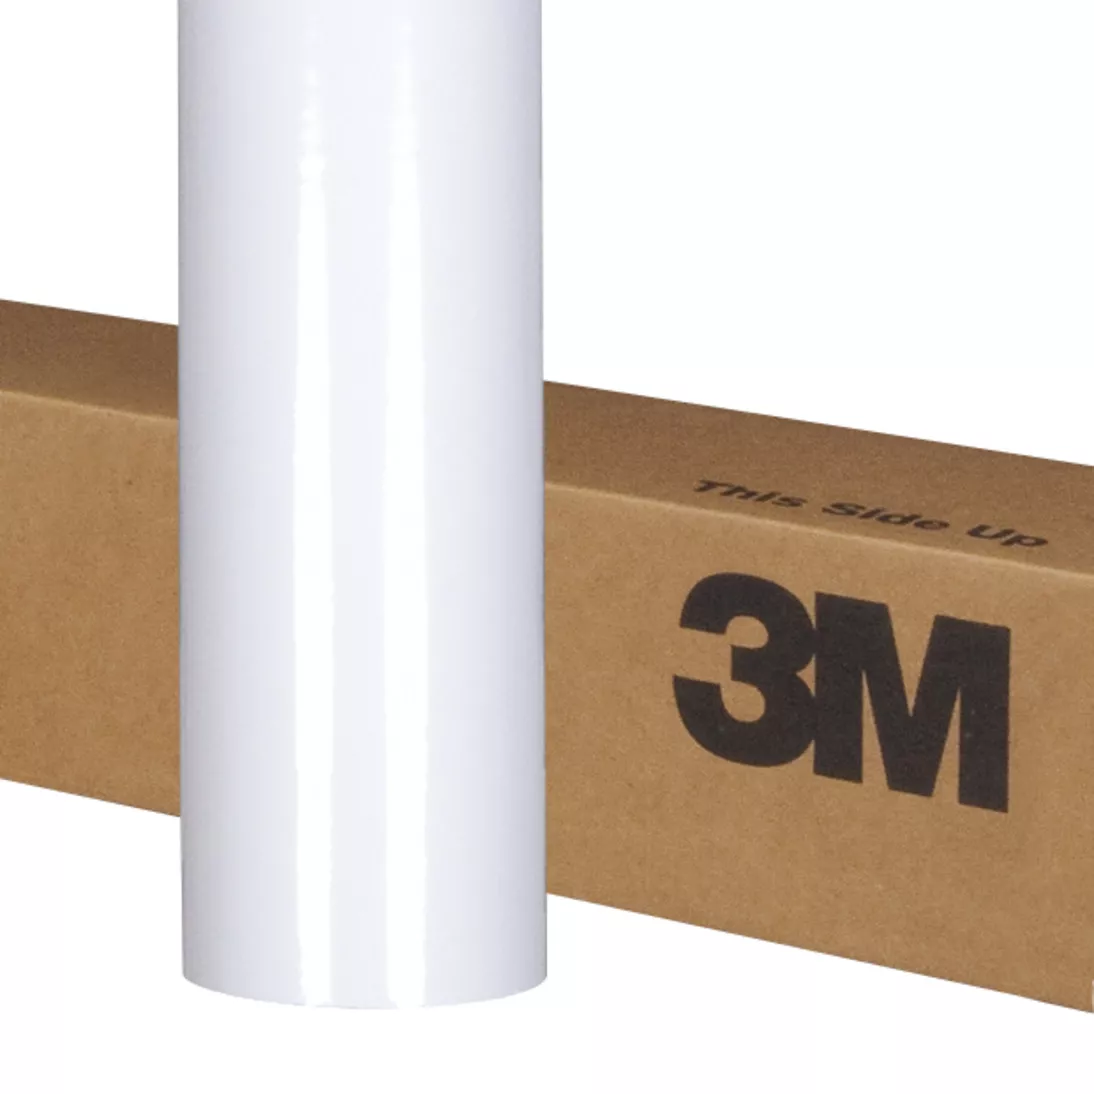 3M™ Scotchcal™ Graphic Film 50-10, White, 48 in x 50 yd